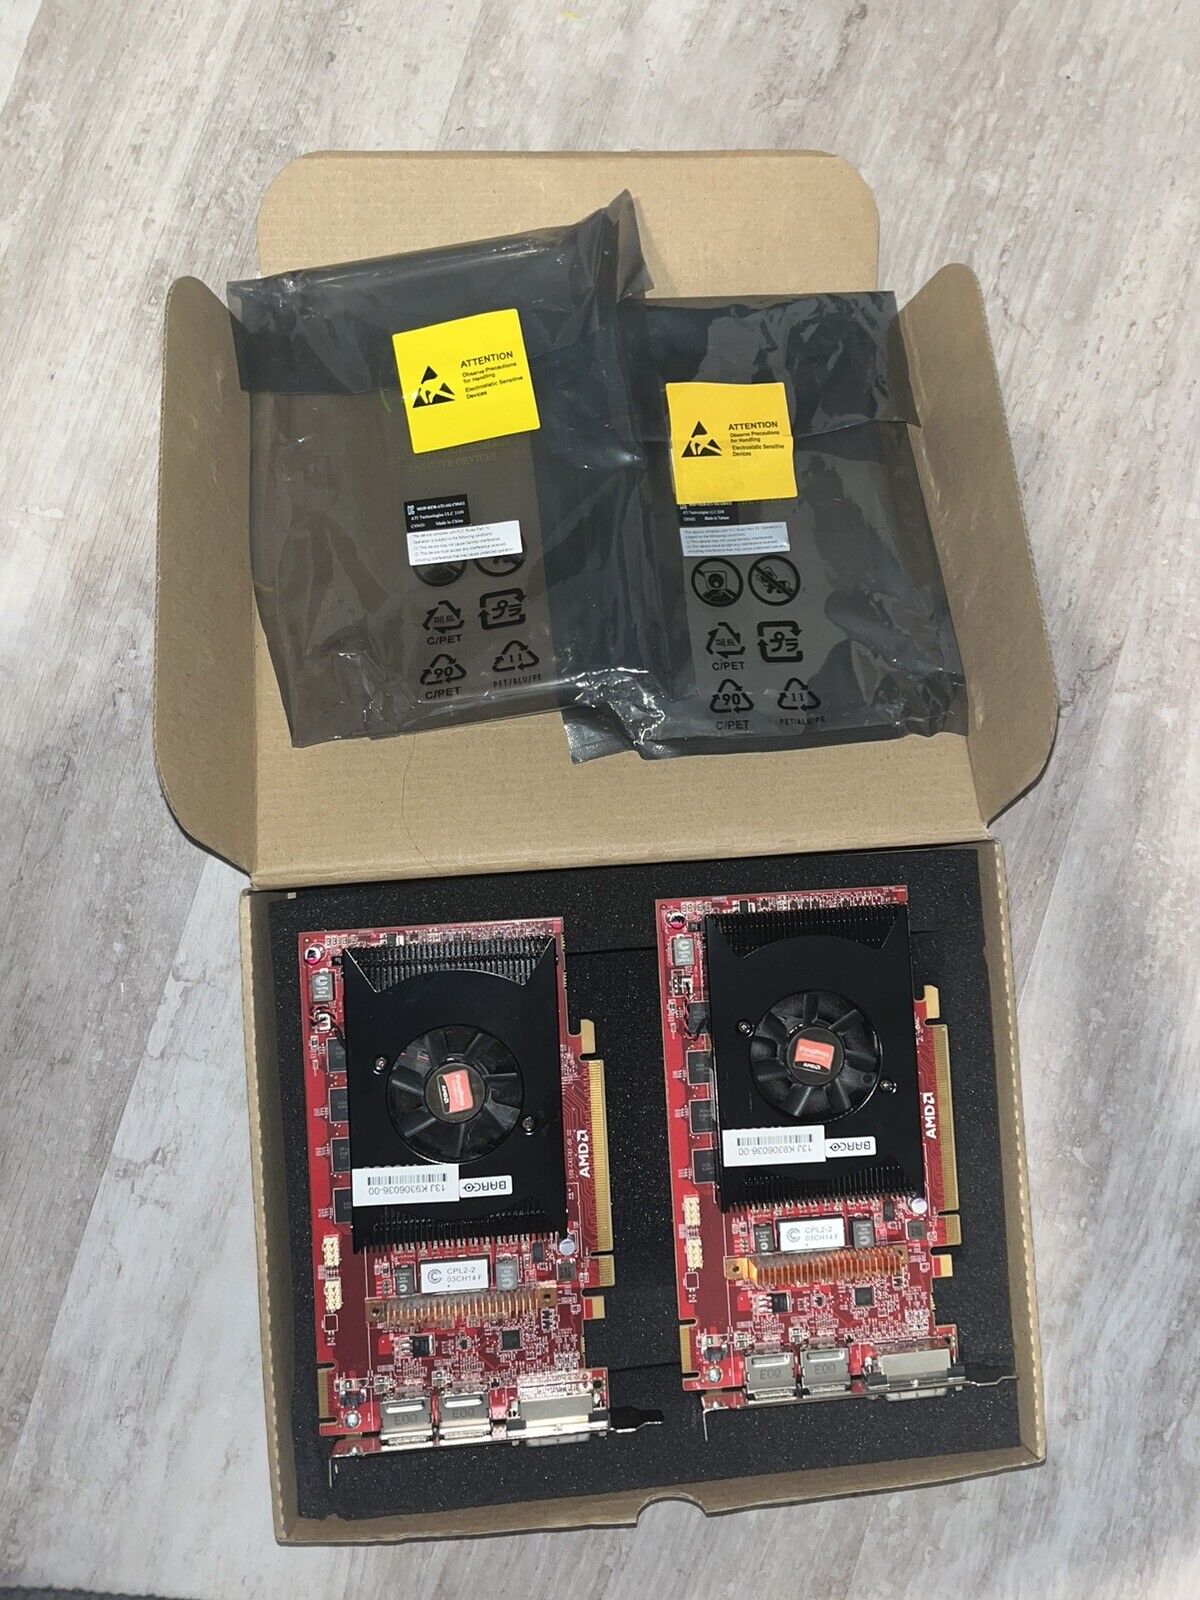 AMD FIRE PRO MXRT-5500 2GB PCle TripleHead Graphic Cards. I Have 4 To Sell NEW